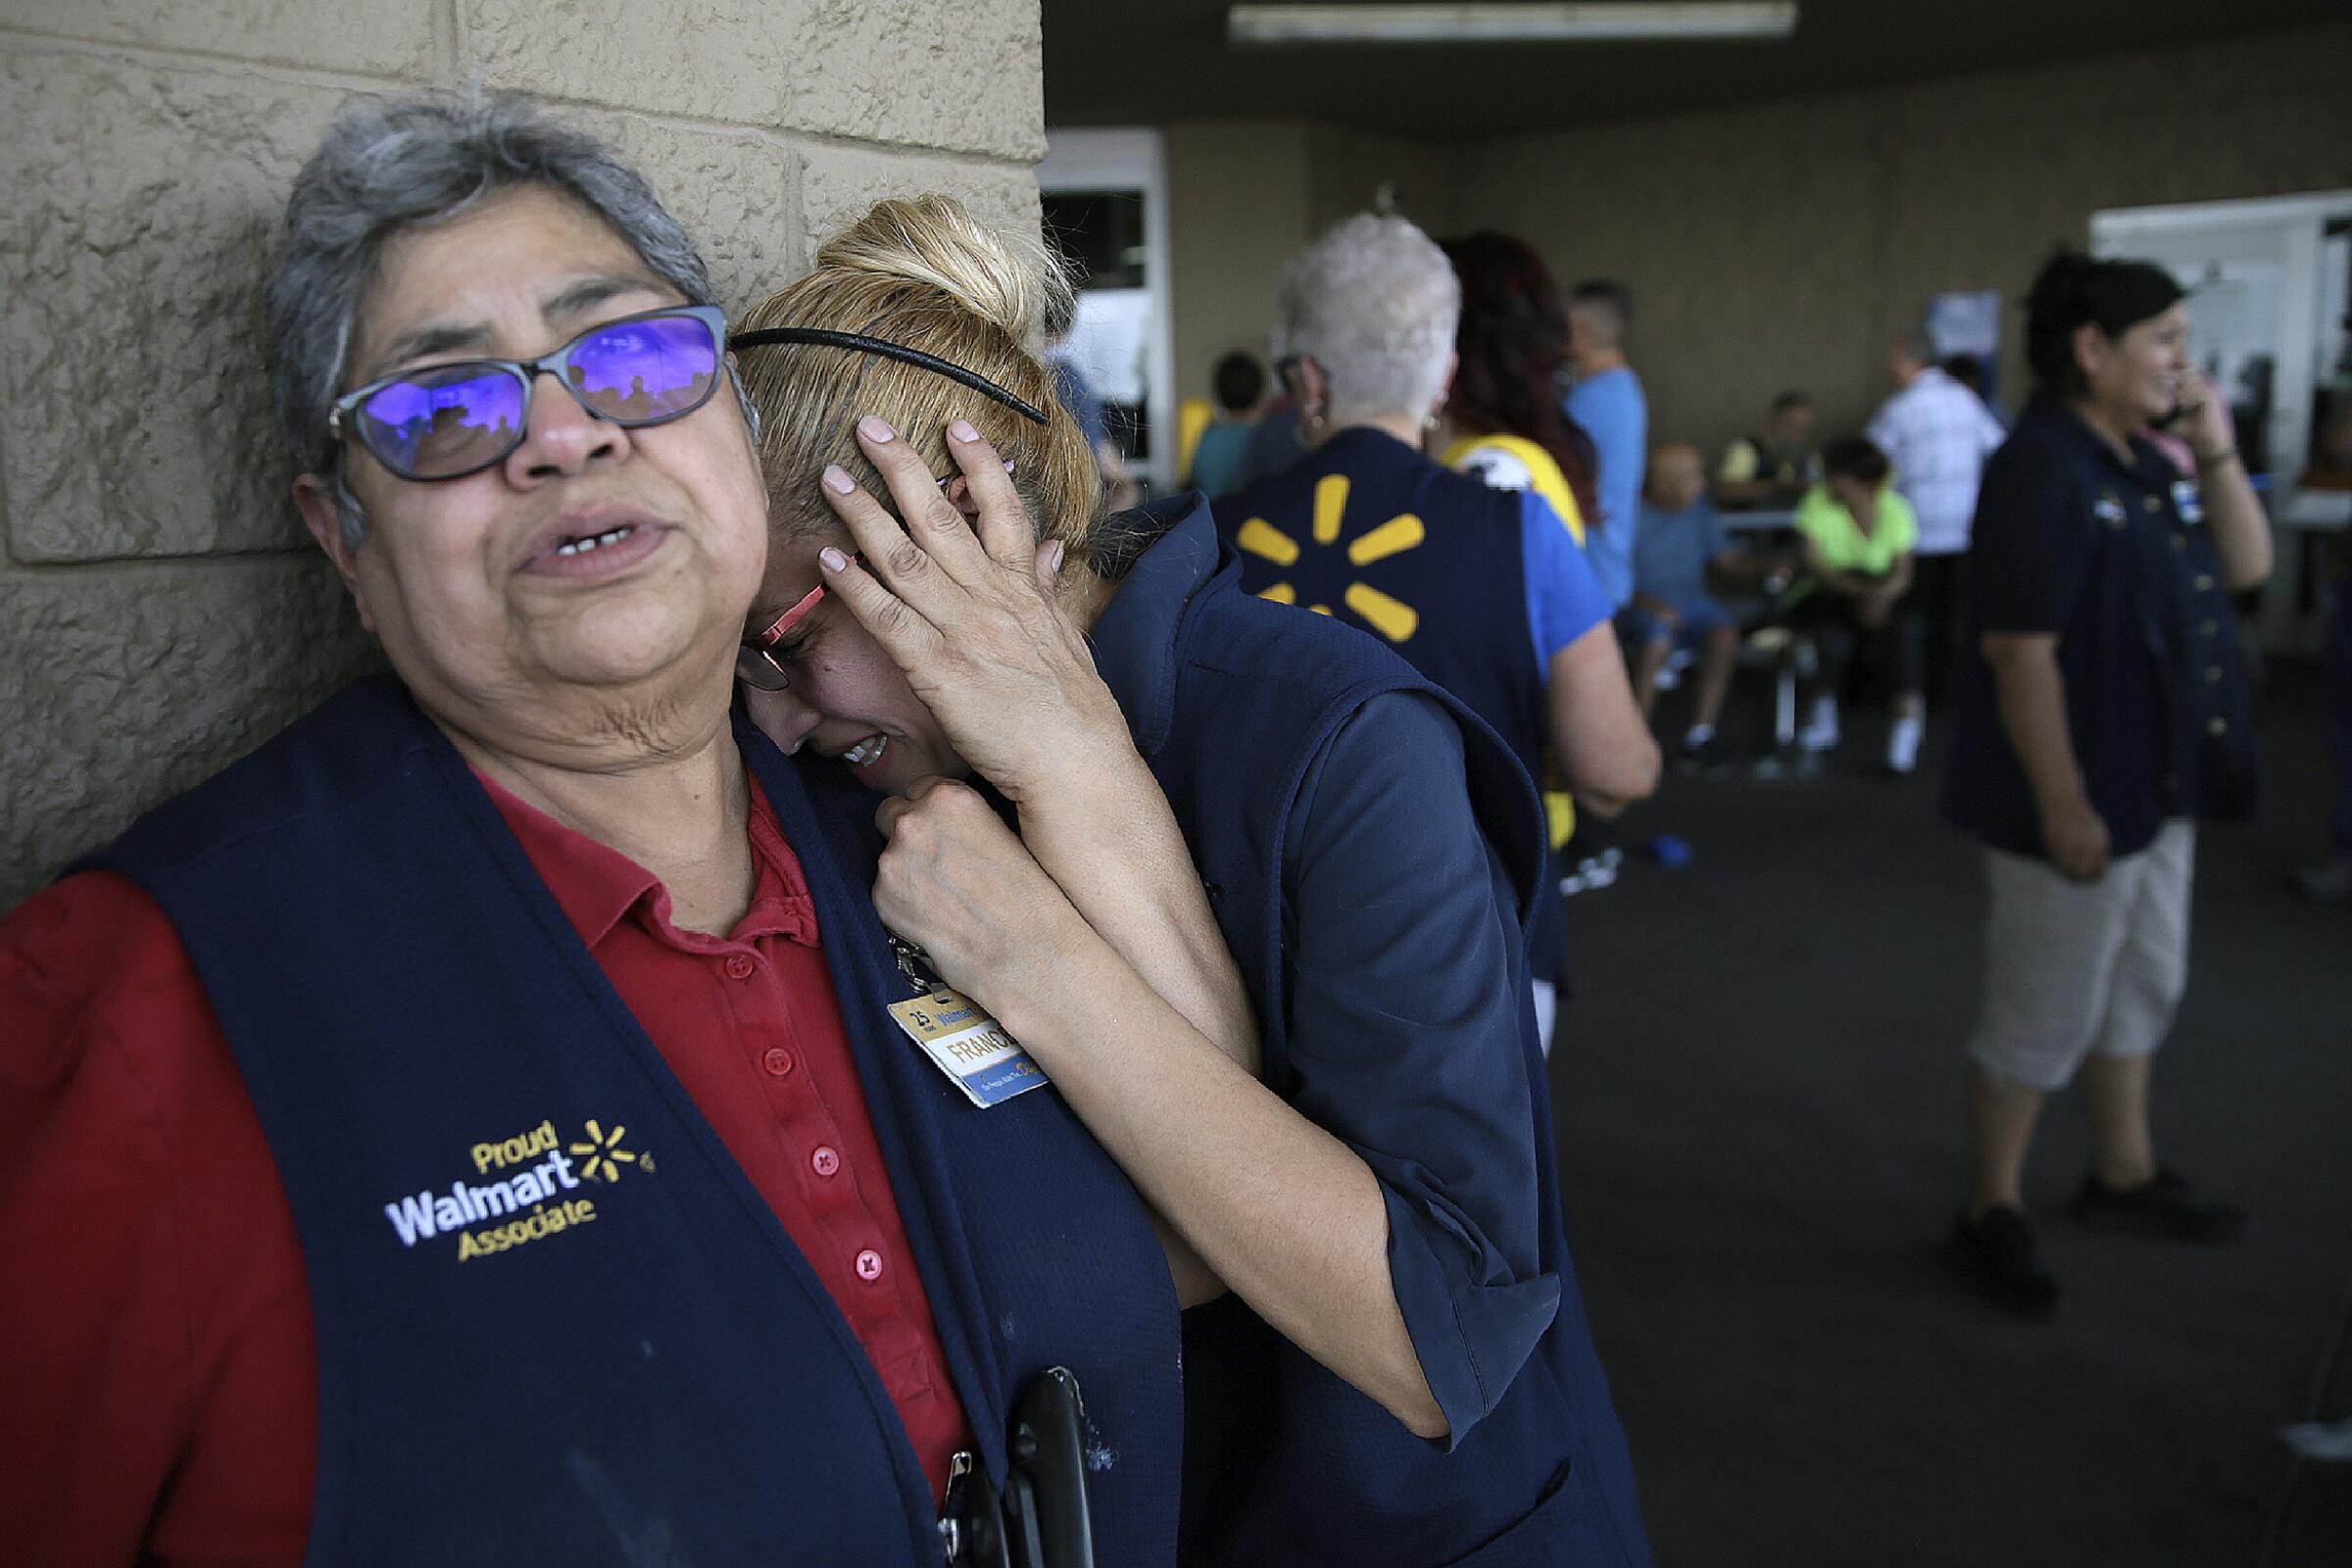 Walmart employees react after shooting in El Paso